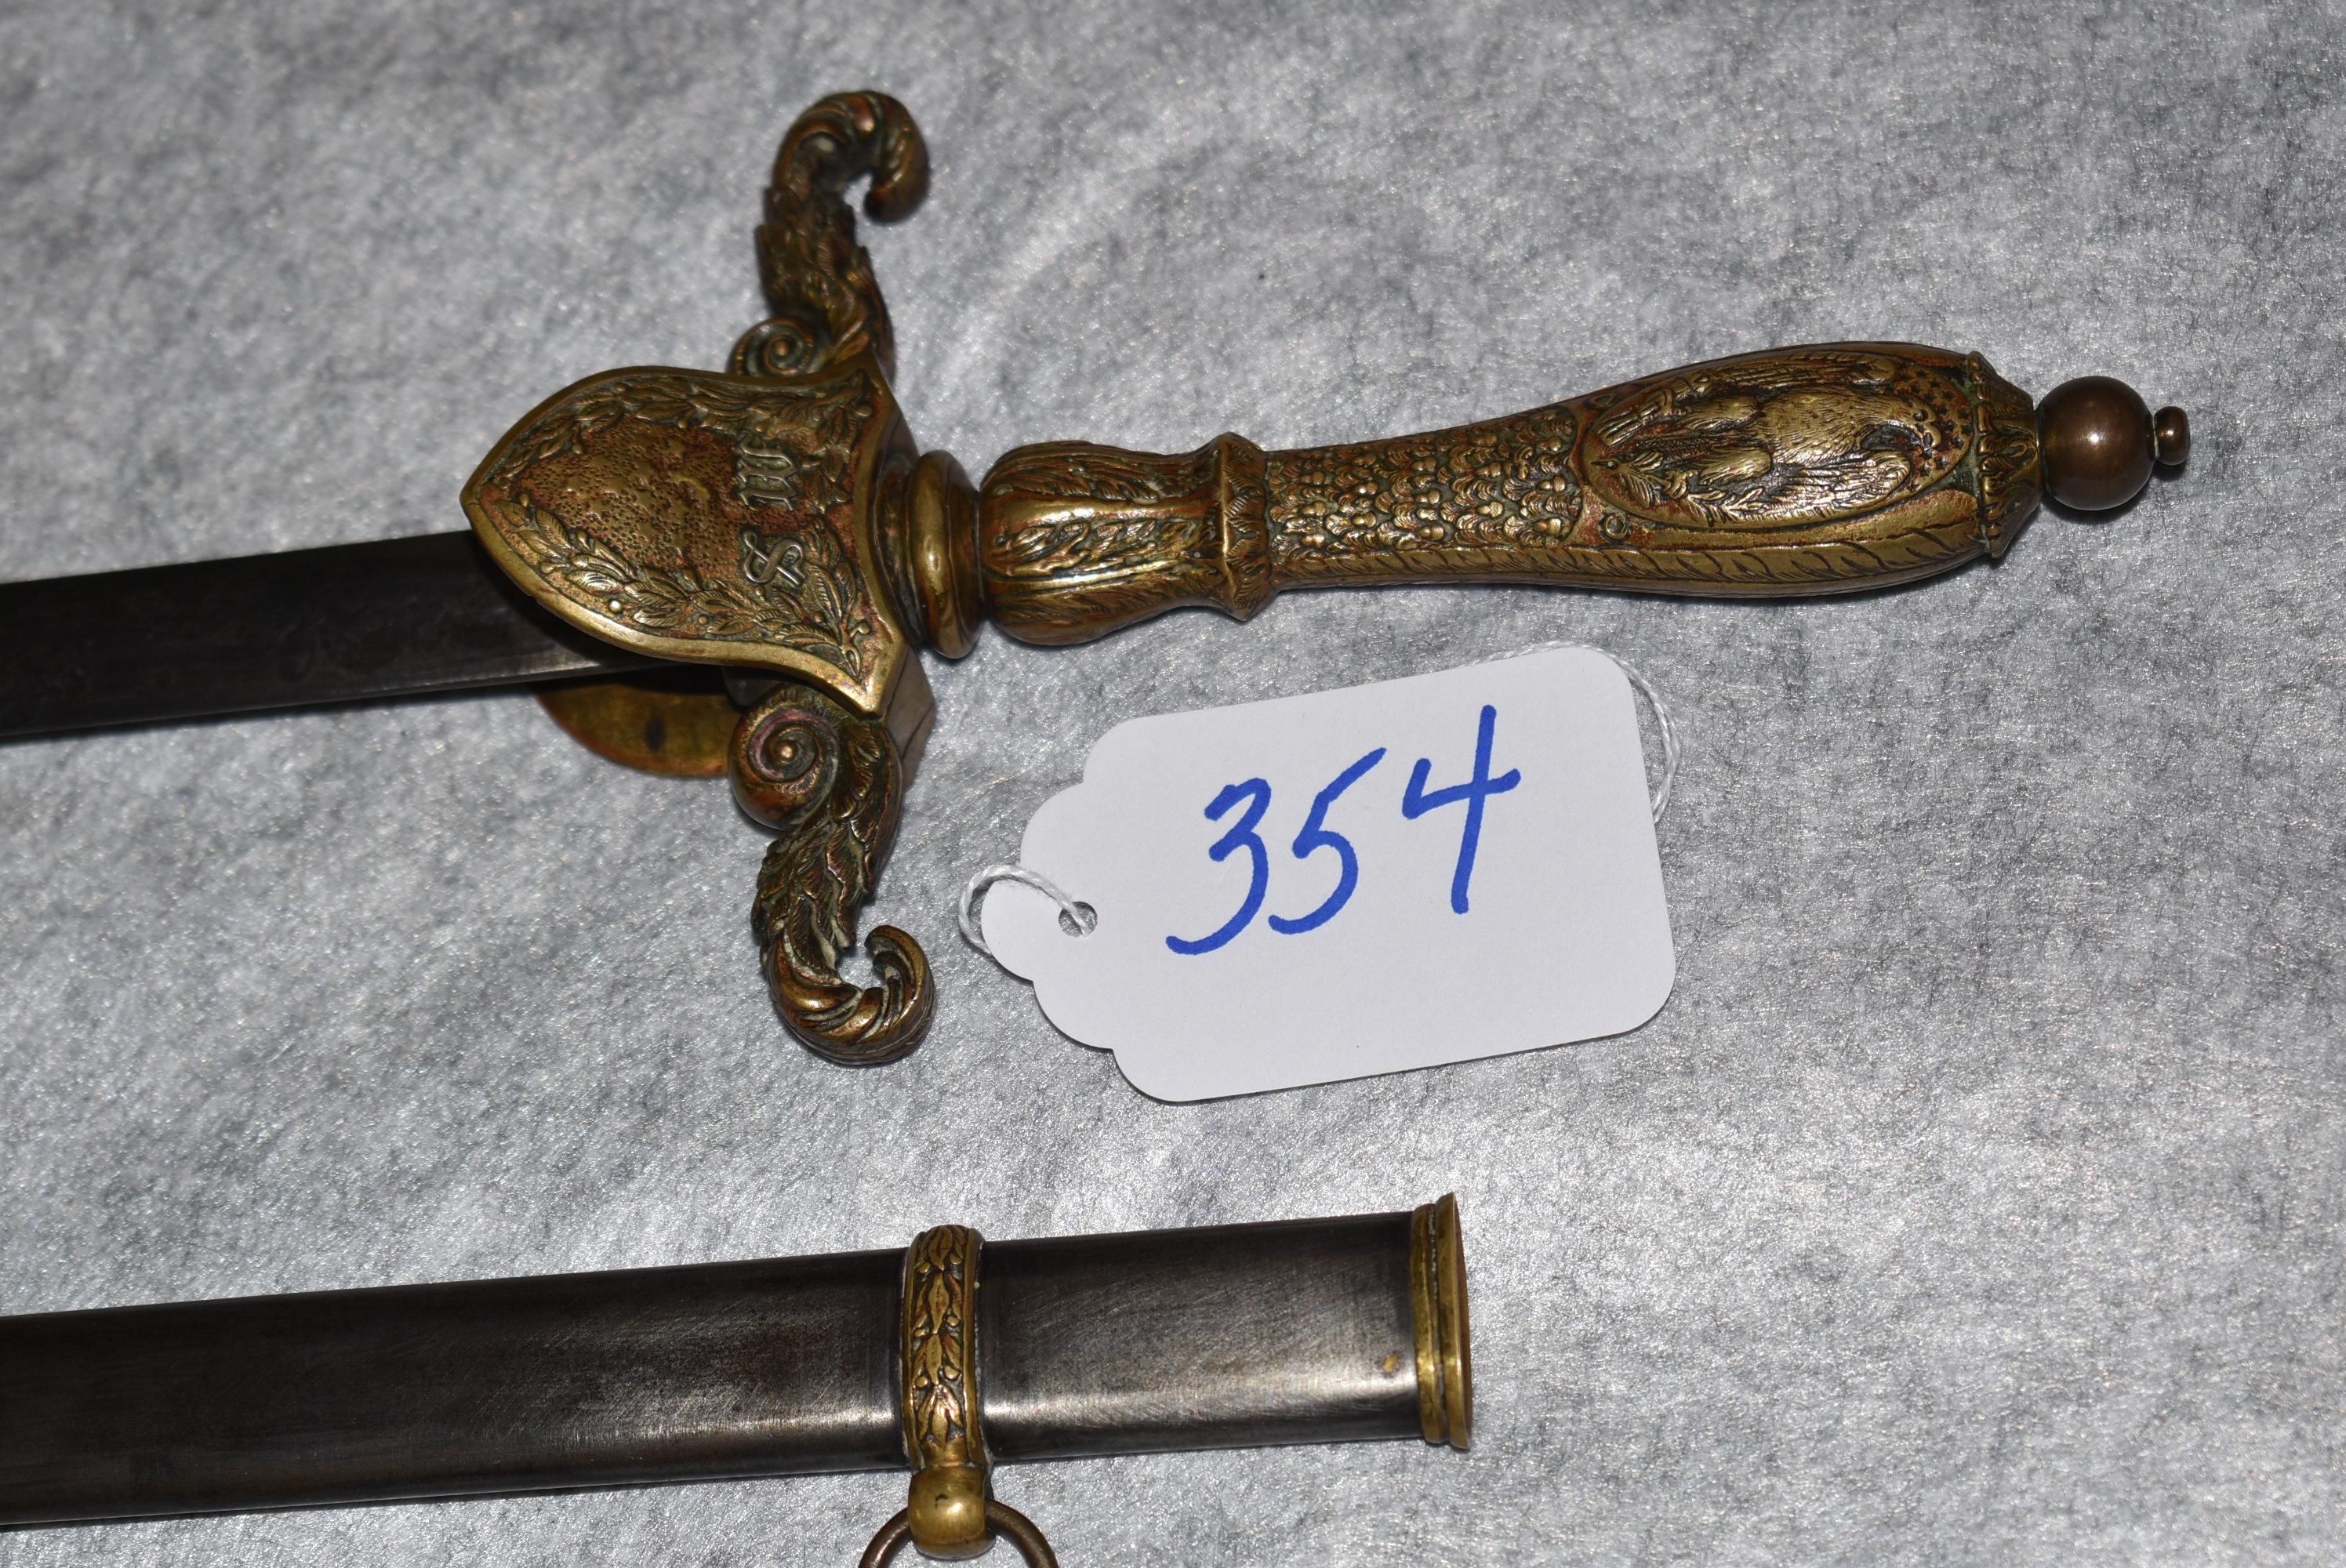 M1840 Medical Officer's sword and scabbard